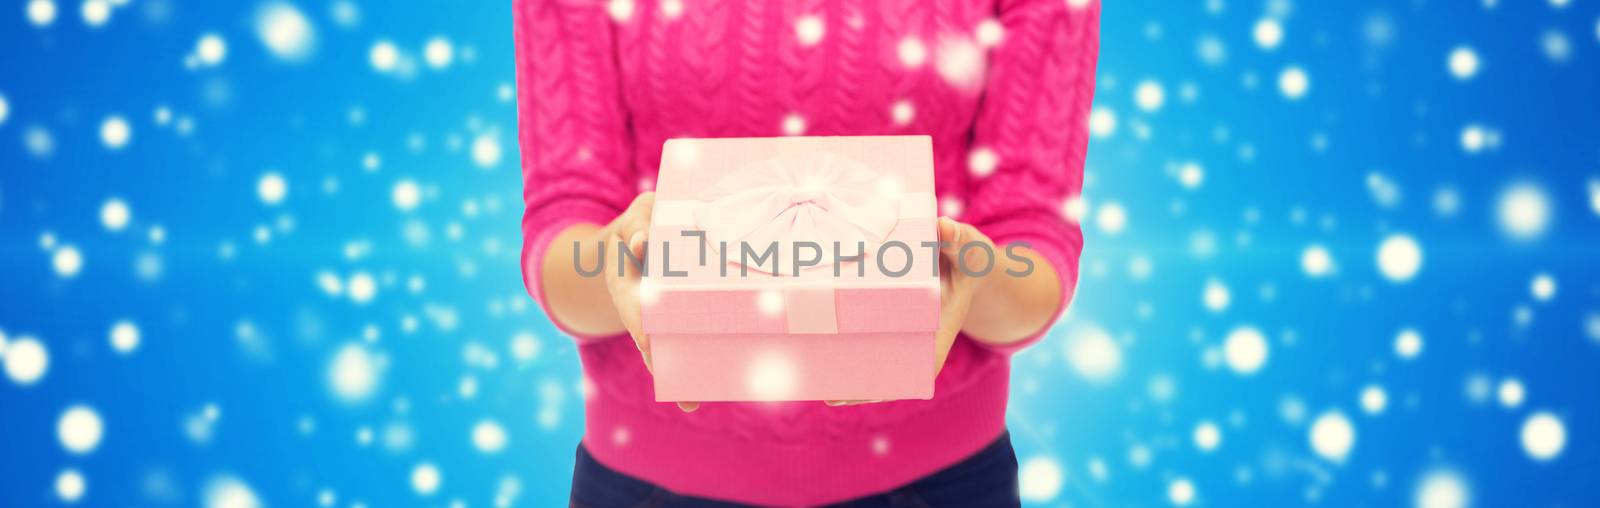 close up of woman in pink sweater holding gift box by dolgachov